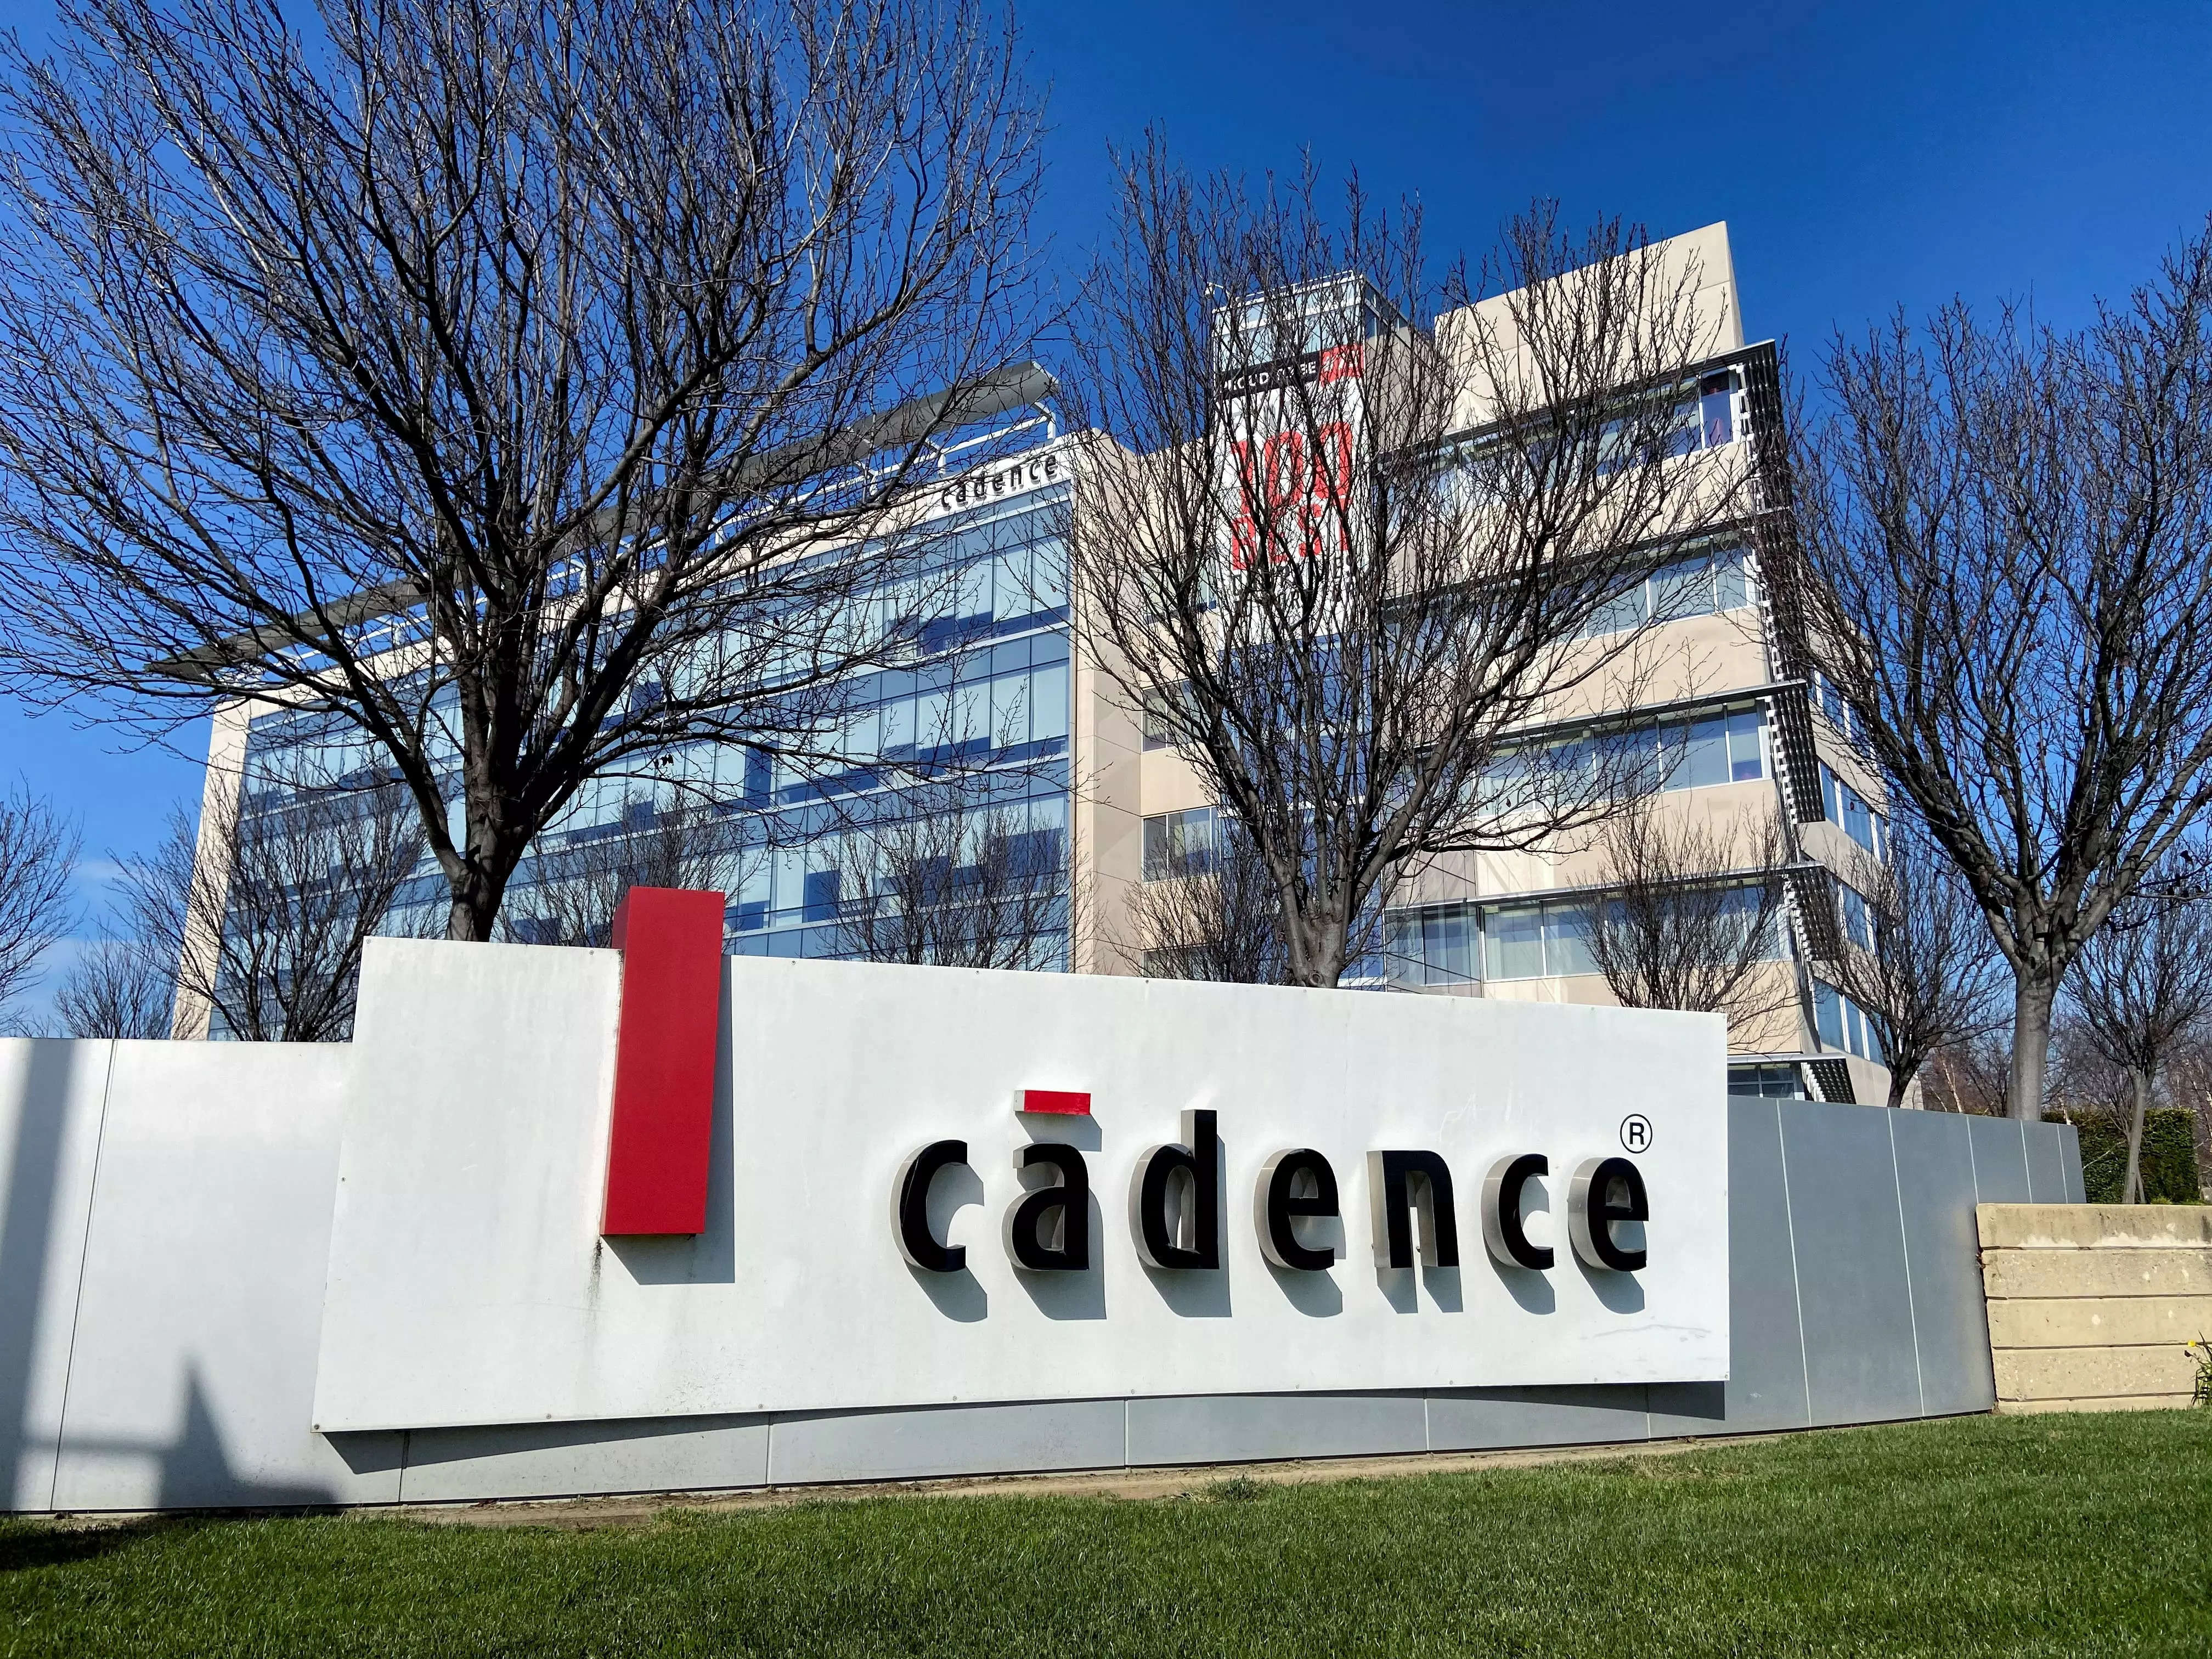 <p>Cadence’s software is an indispensable design tool for semiconductor firms large and small. Its critical role in the global chip industry was highlighted by the US Department of Commerce putting export controls on design software for cutting-edge semiconductors last year as part of measures to cut off China’s access to advanced technologies.</p>